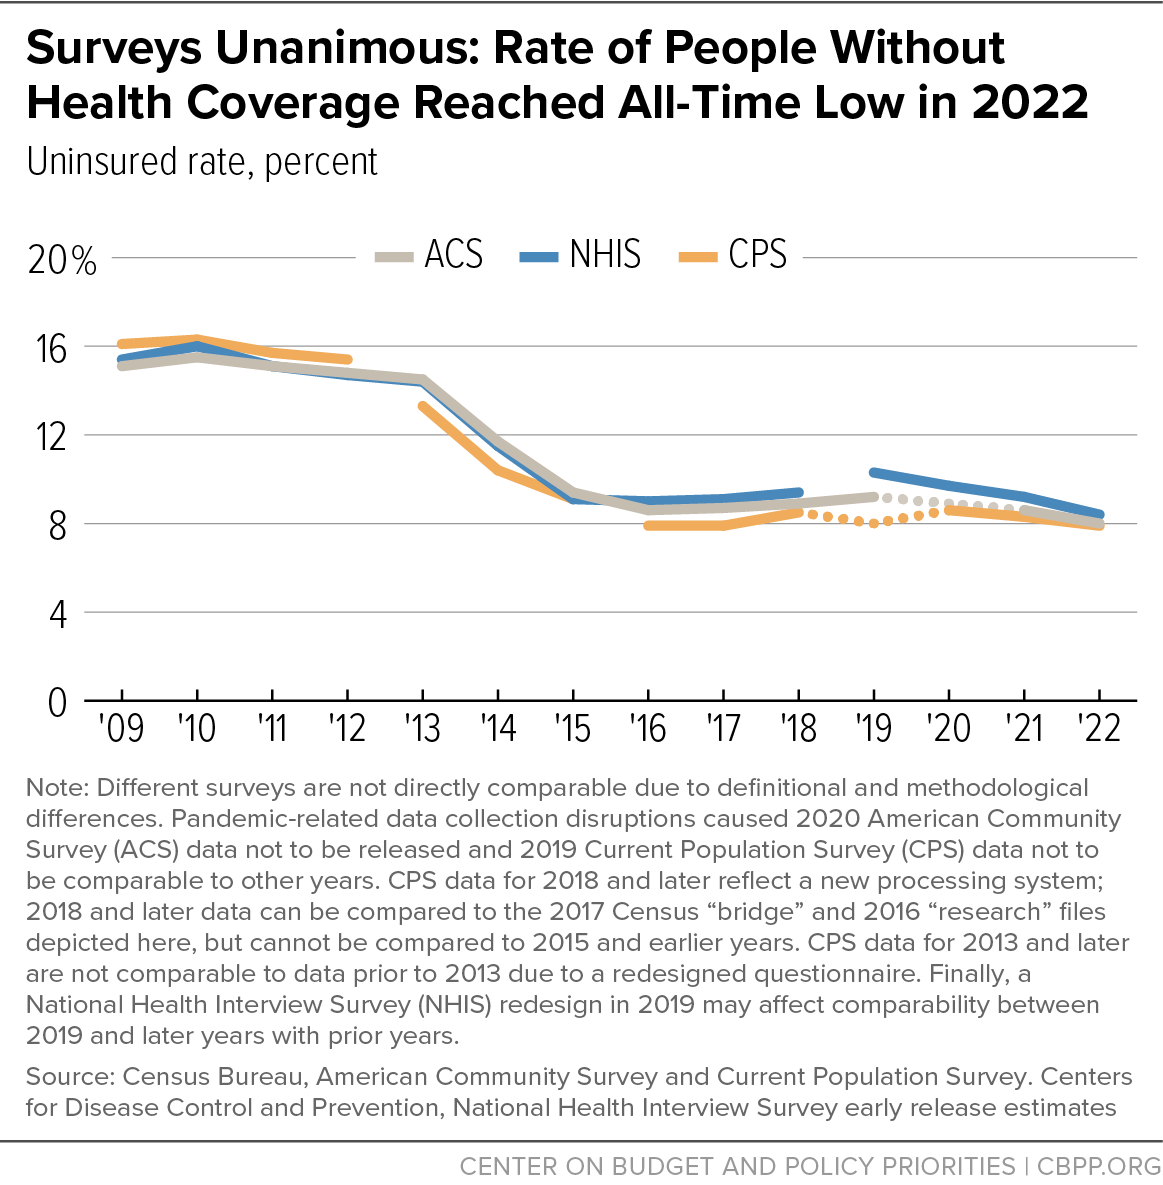 Surveys Unanimous: Rate of People Without Health Coverage Reached All-Time Low in 2022